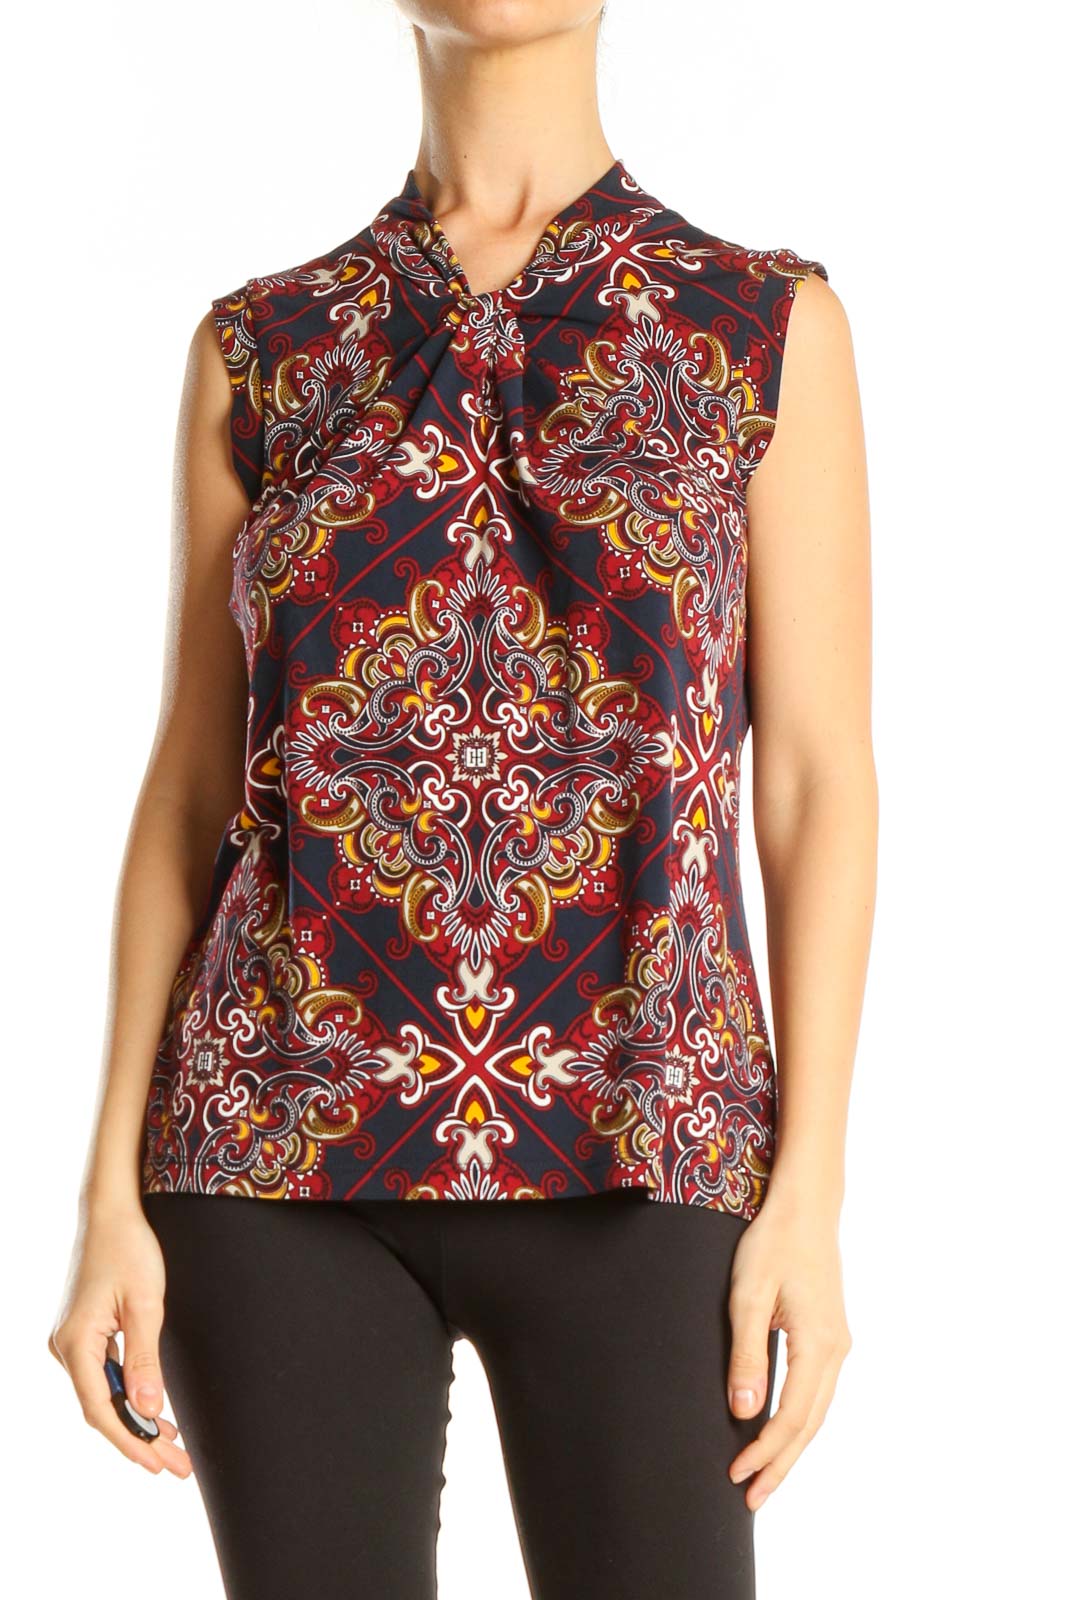 Red Graphic Print Top Front